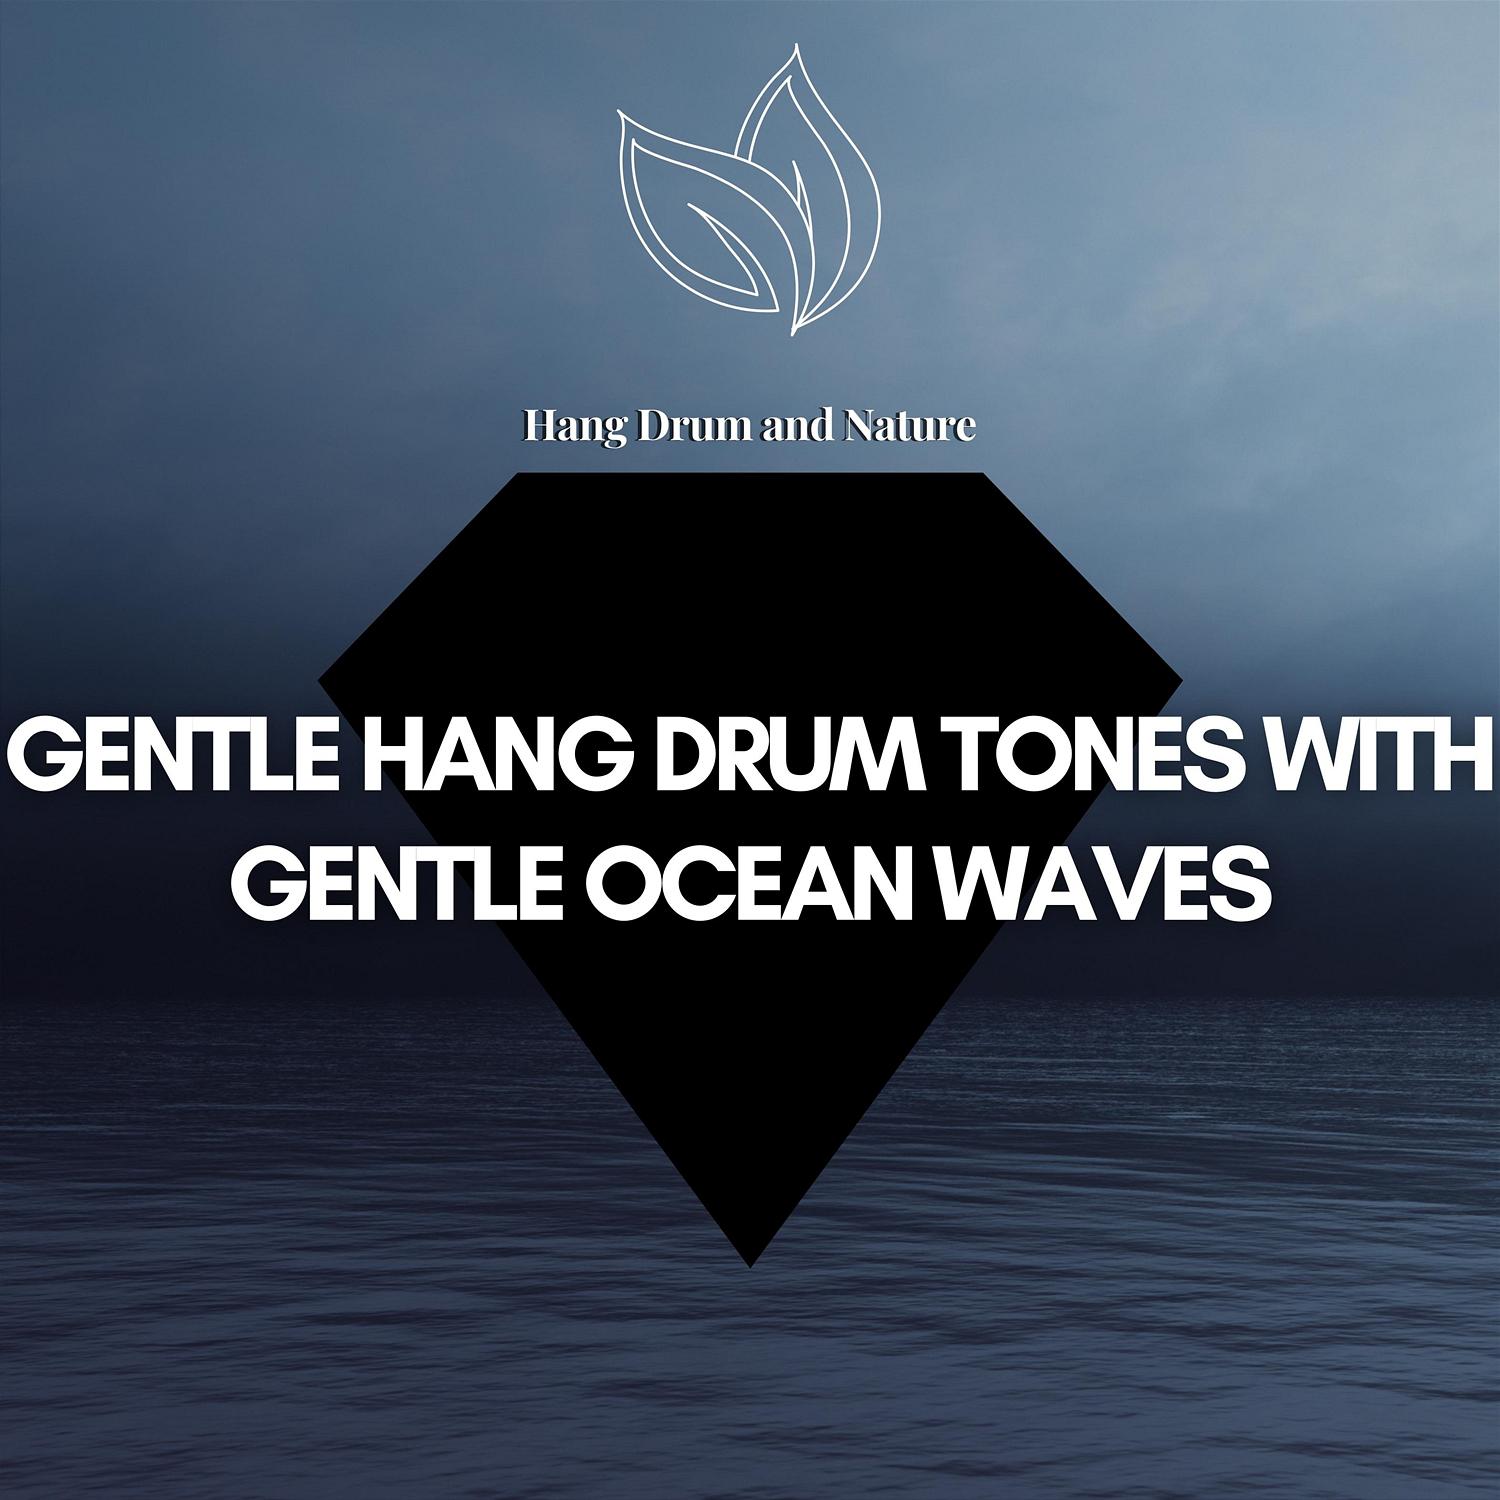 Hang Drum - Luminescence - with Sea Sound